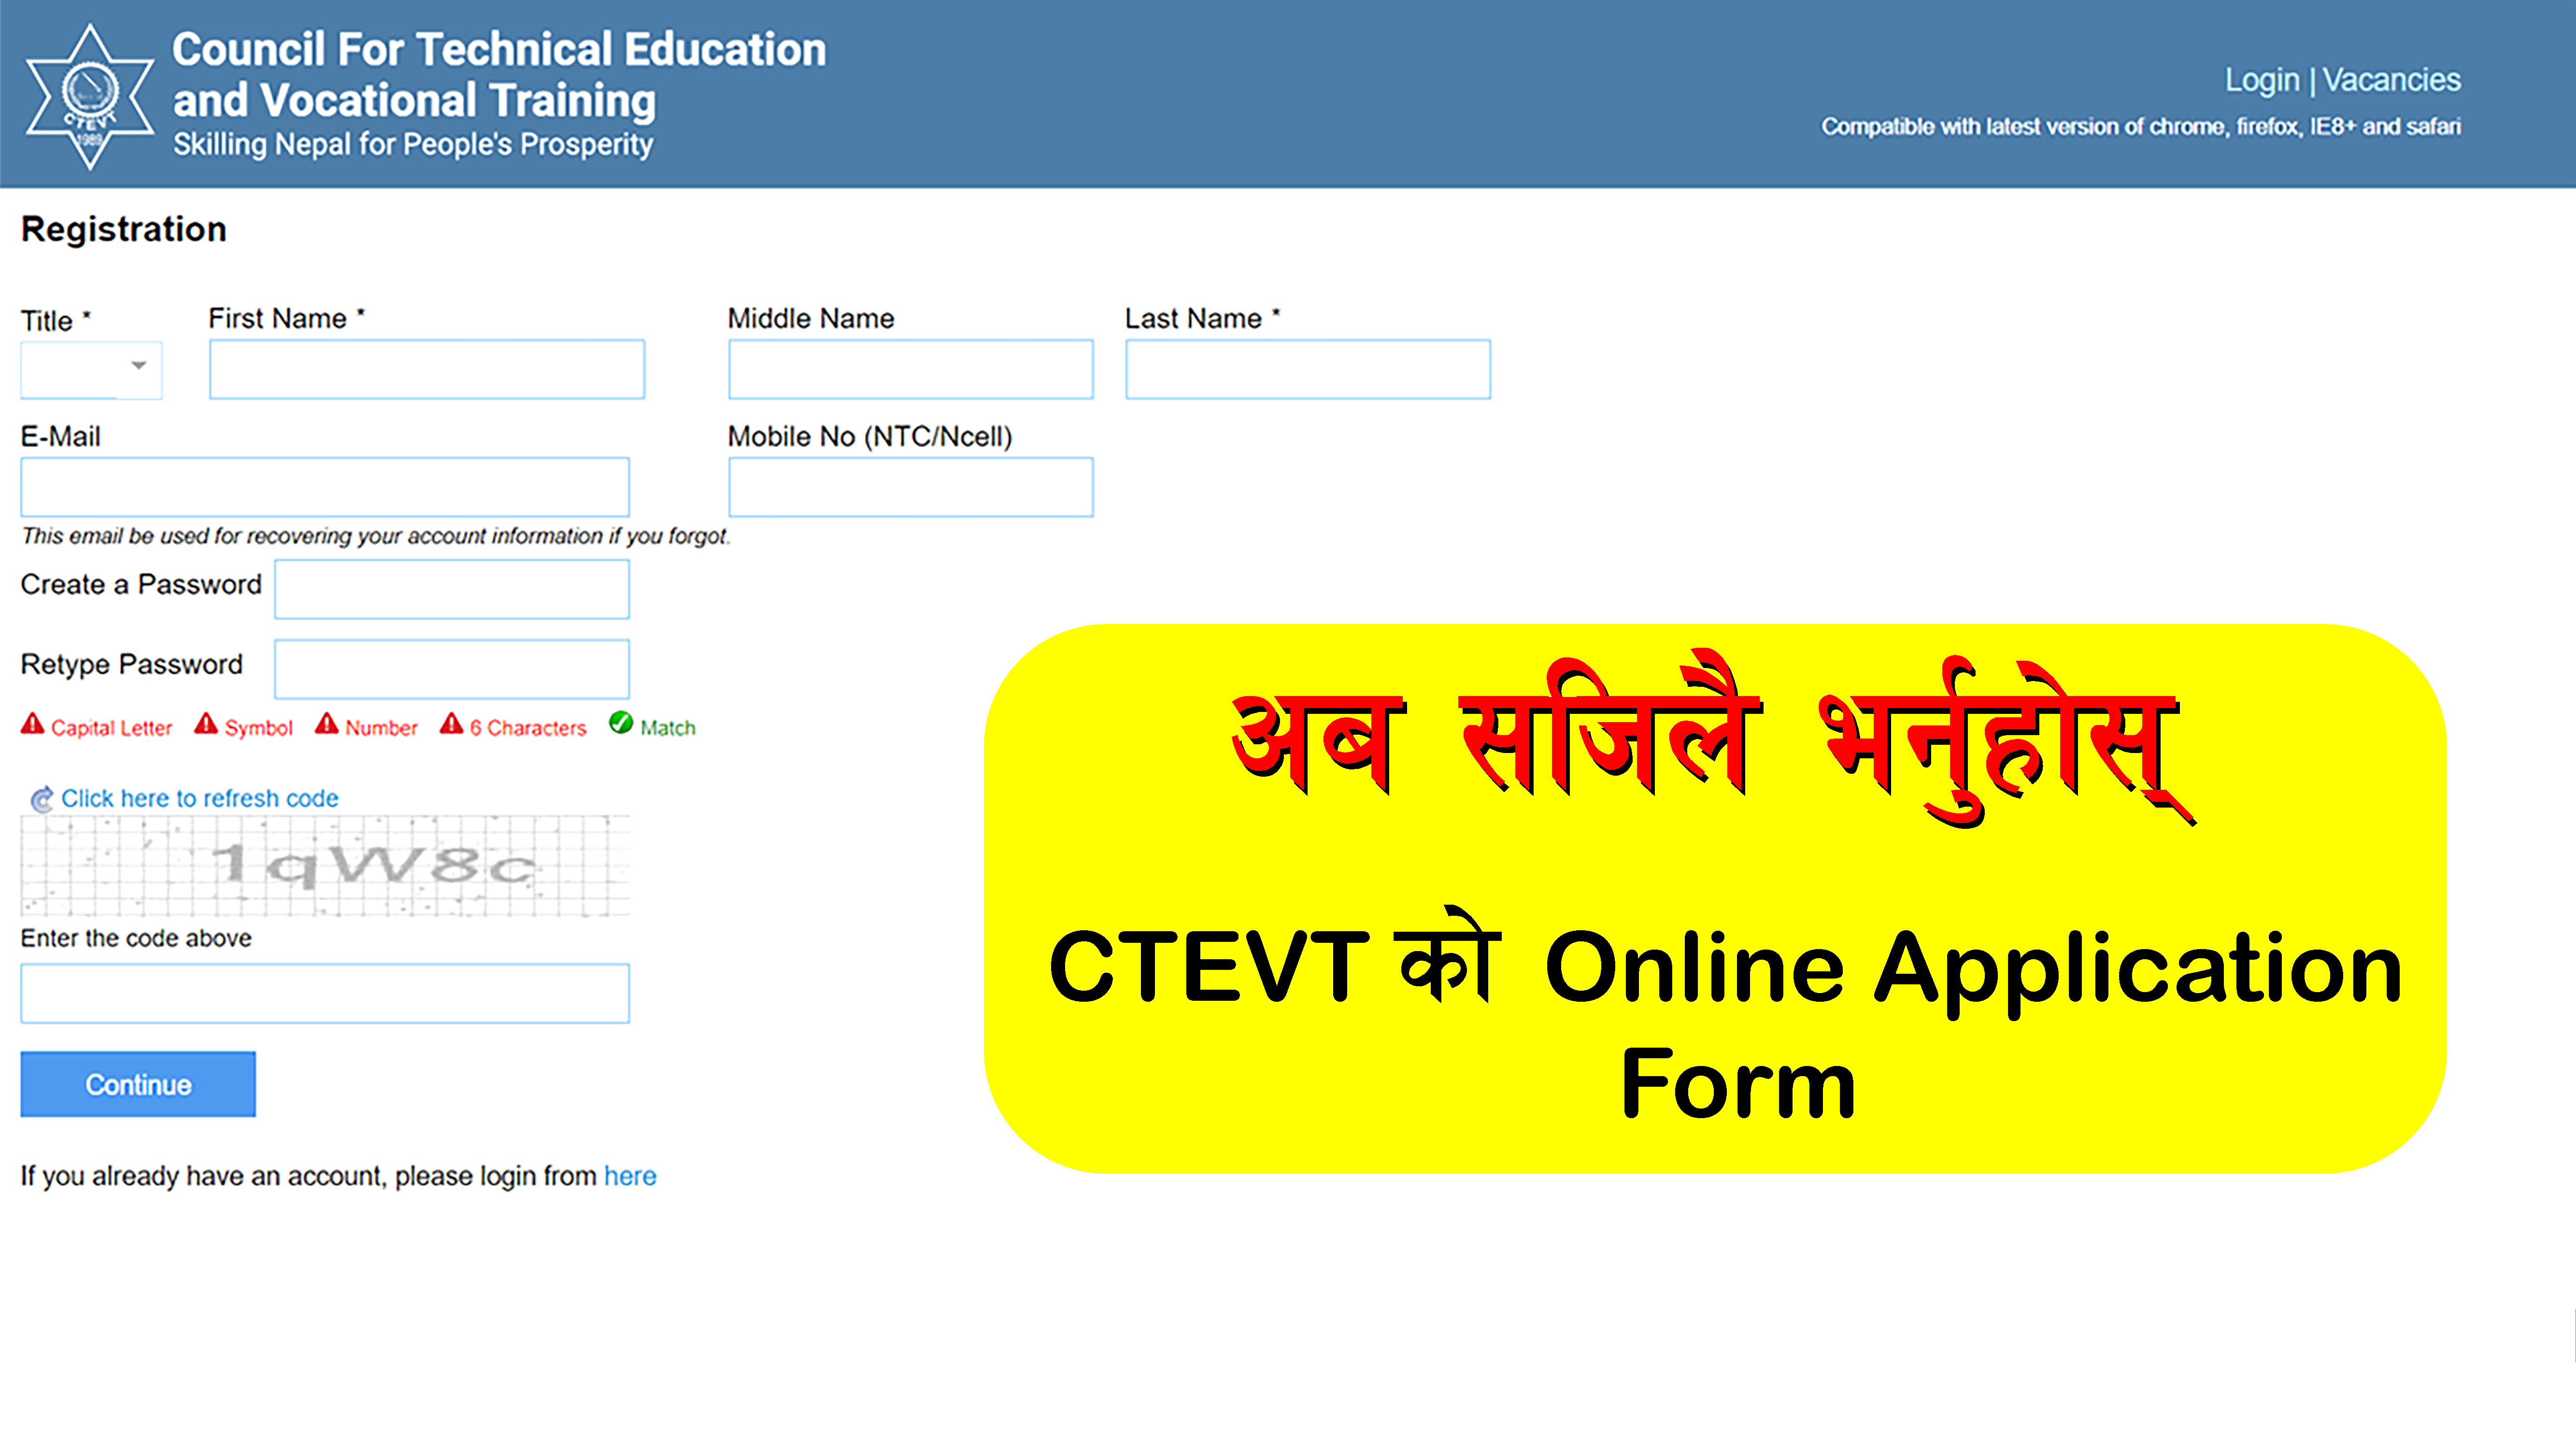 You Can Submit CTEVT online application form in go to CTEVT Official website: www.ctevt.org.np. CTEVT online jobs application wwwobs.ctevt.org.np